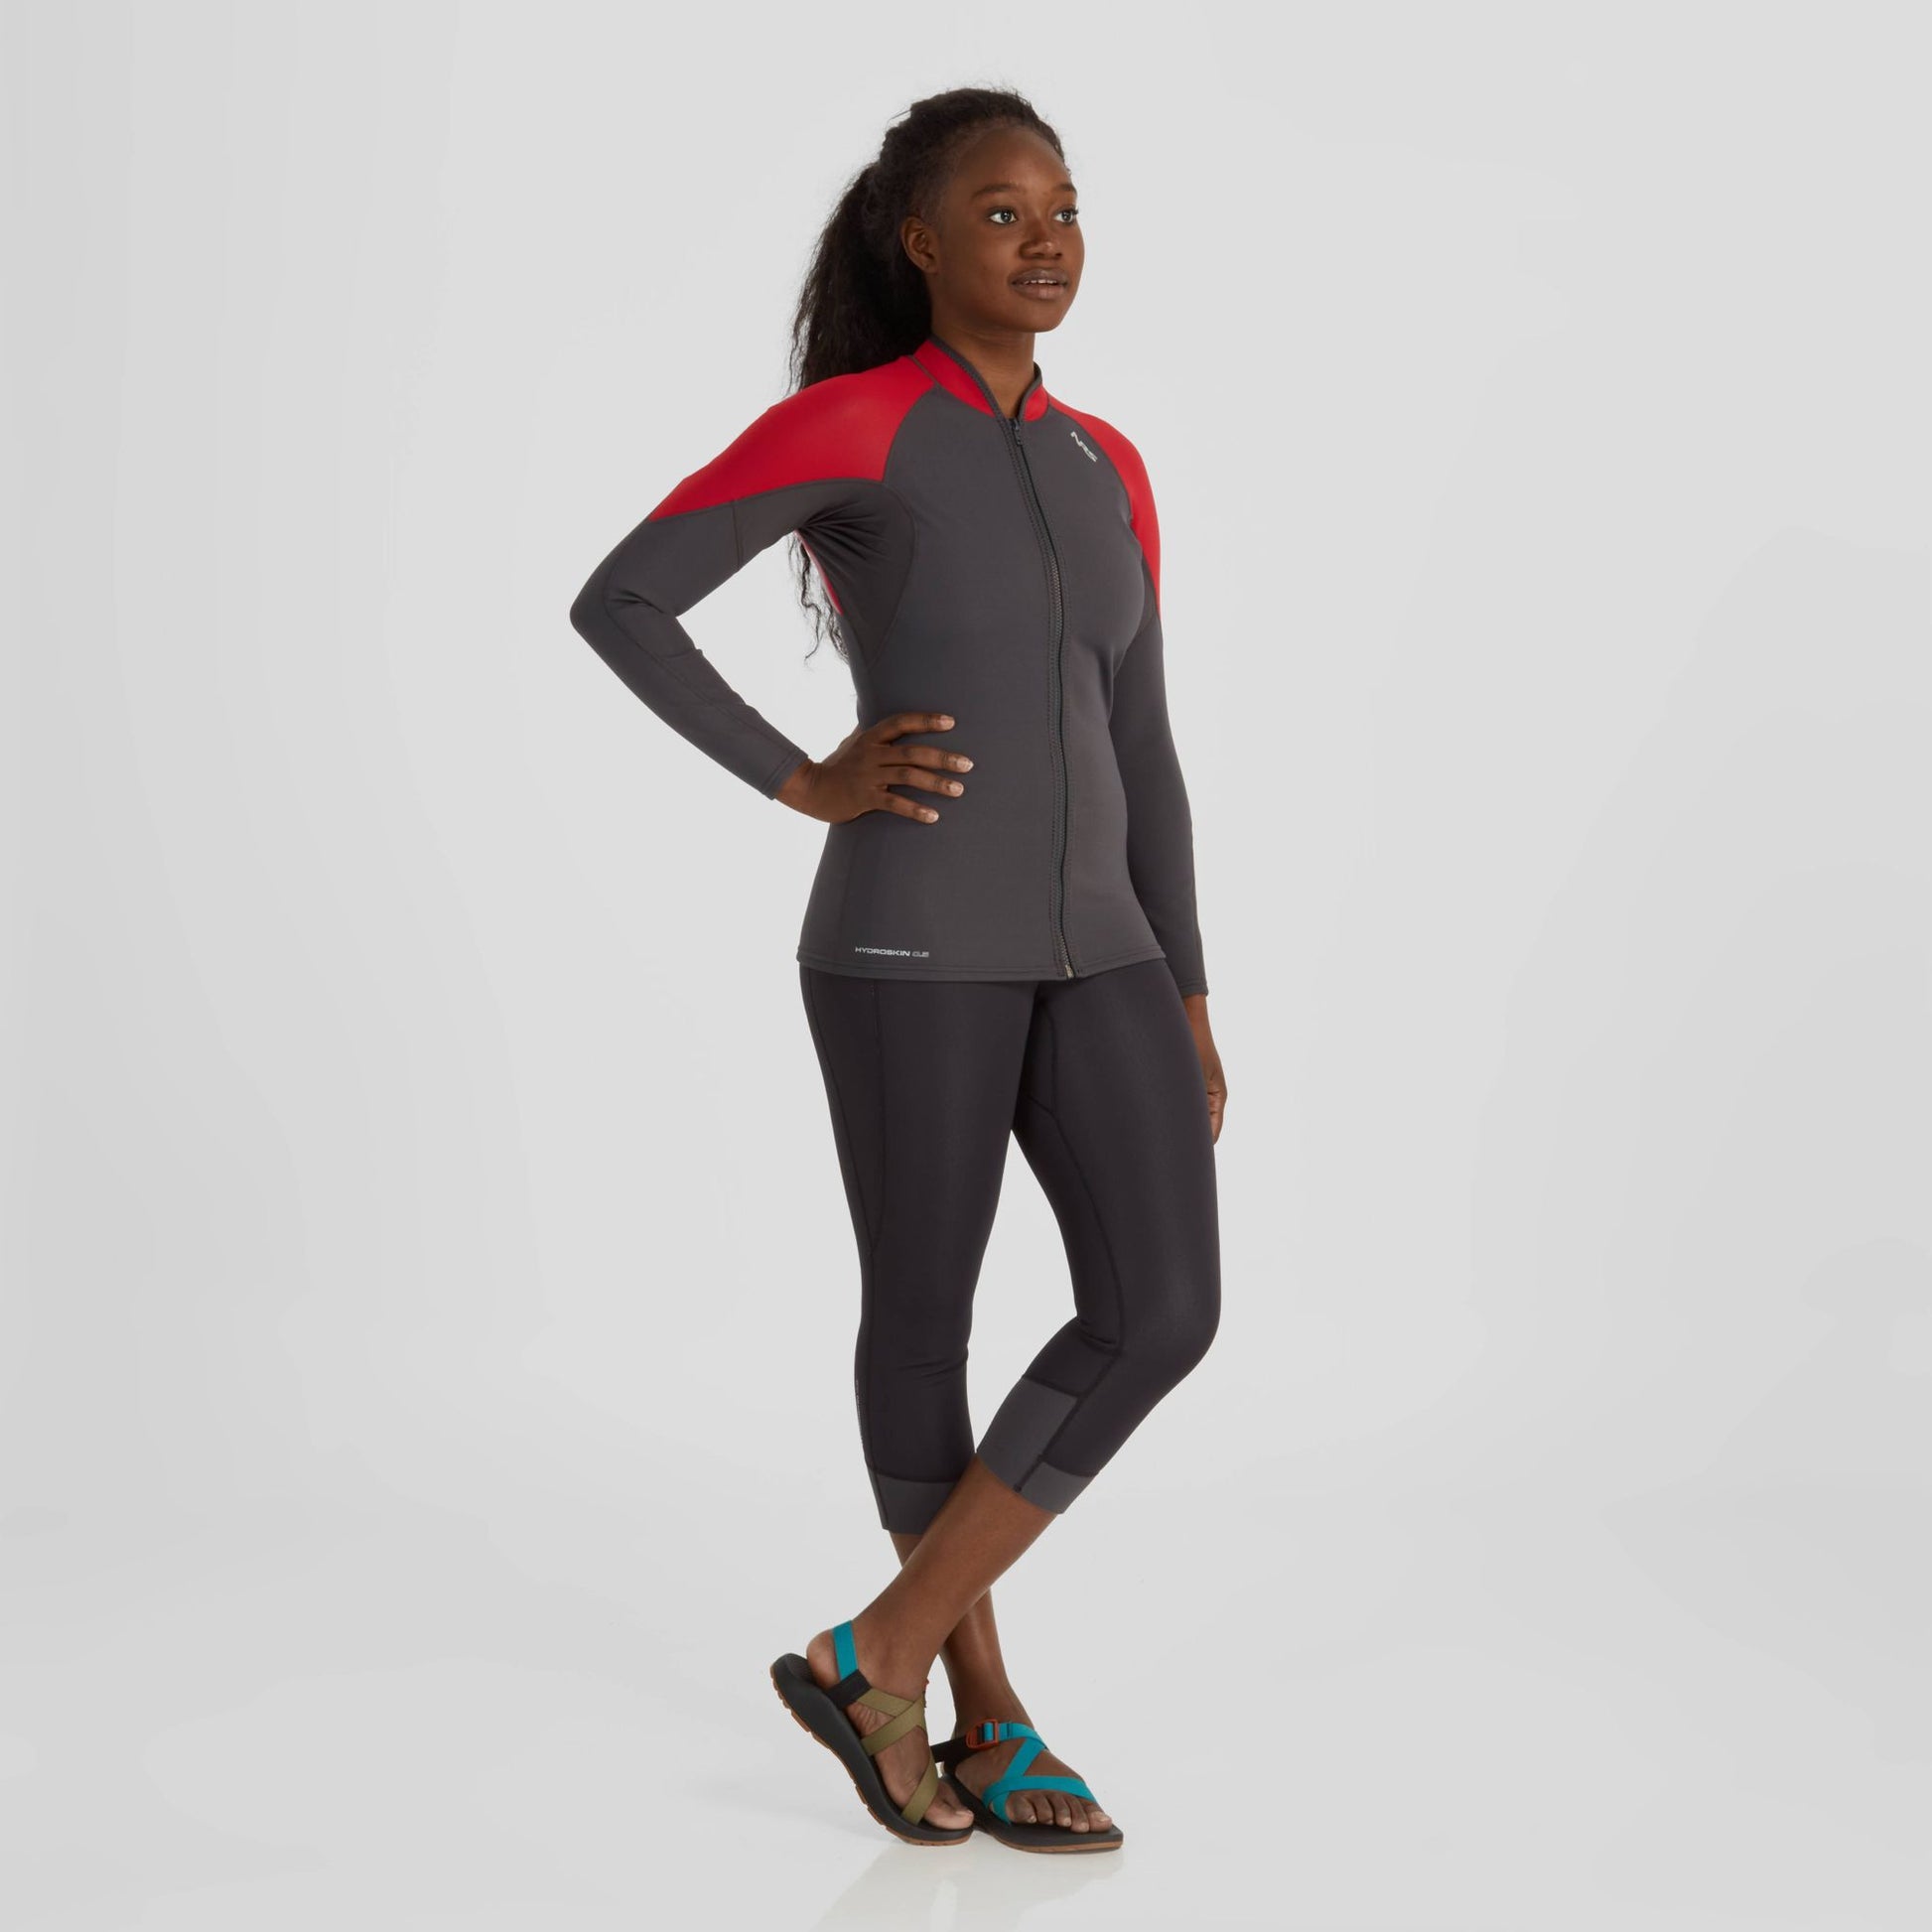 A young woman in a red and gray NRS Hydroskin 0.5 Capri wetsuit standing confidently against a white background.